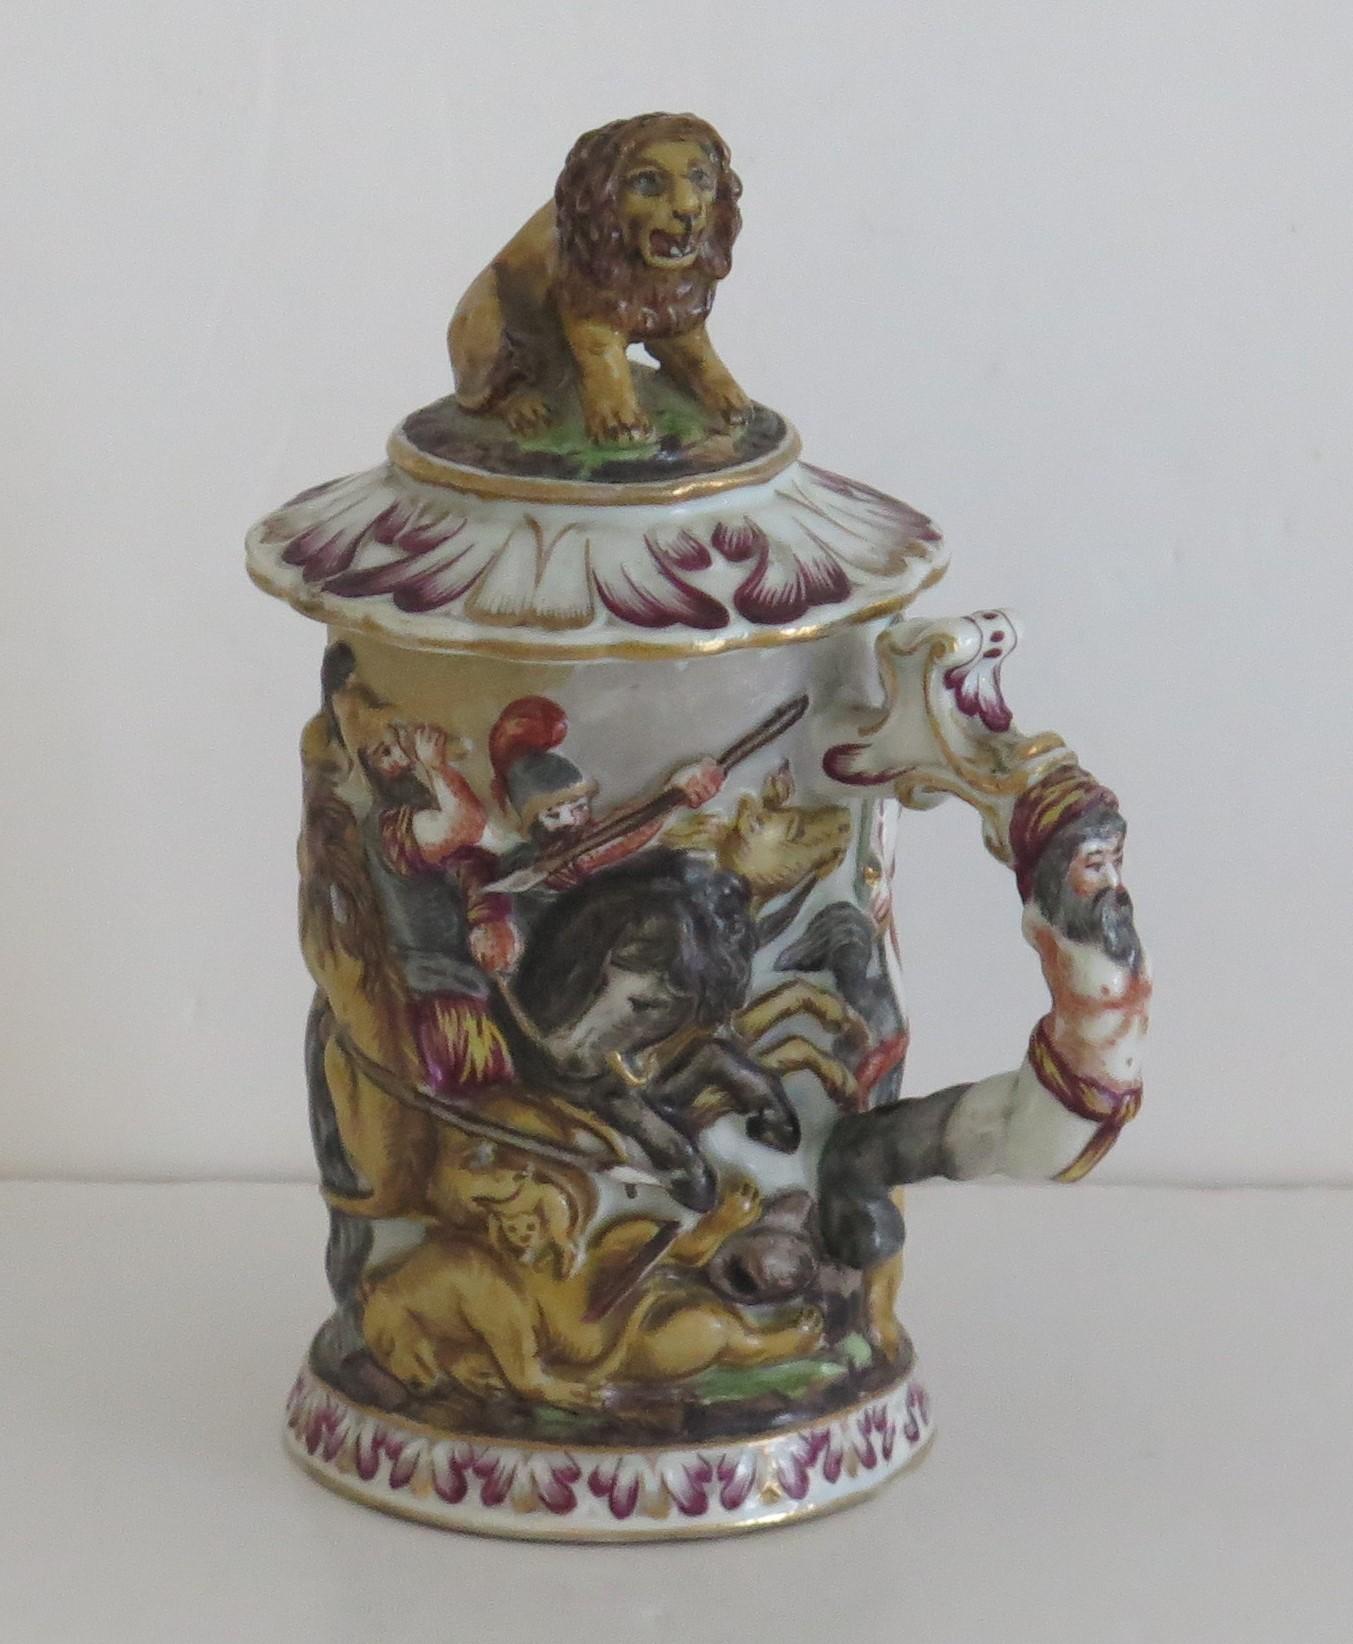 This is a Naples (Capodimonte) Porcelain Lidded Tankard with deep relief body, which we date to the early 19th Century and made in Naples, Italy.

The tankard is hand made with deep relief decoration of a hunting scene with men on horseback